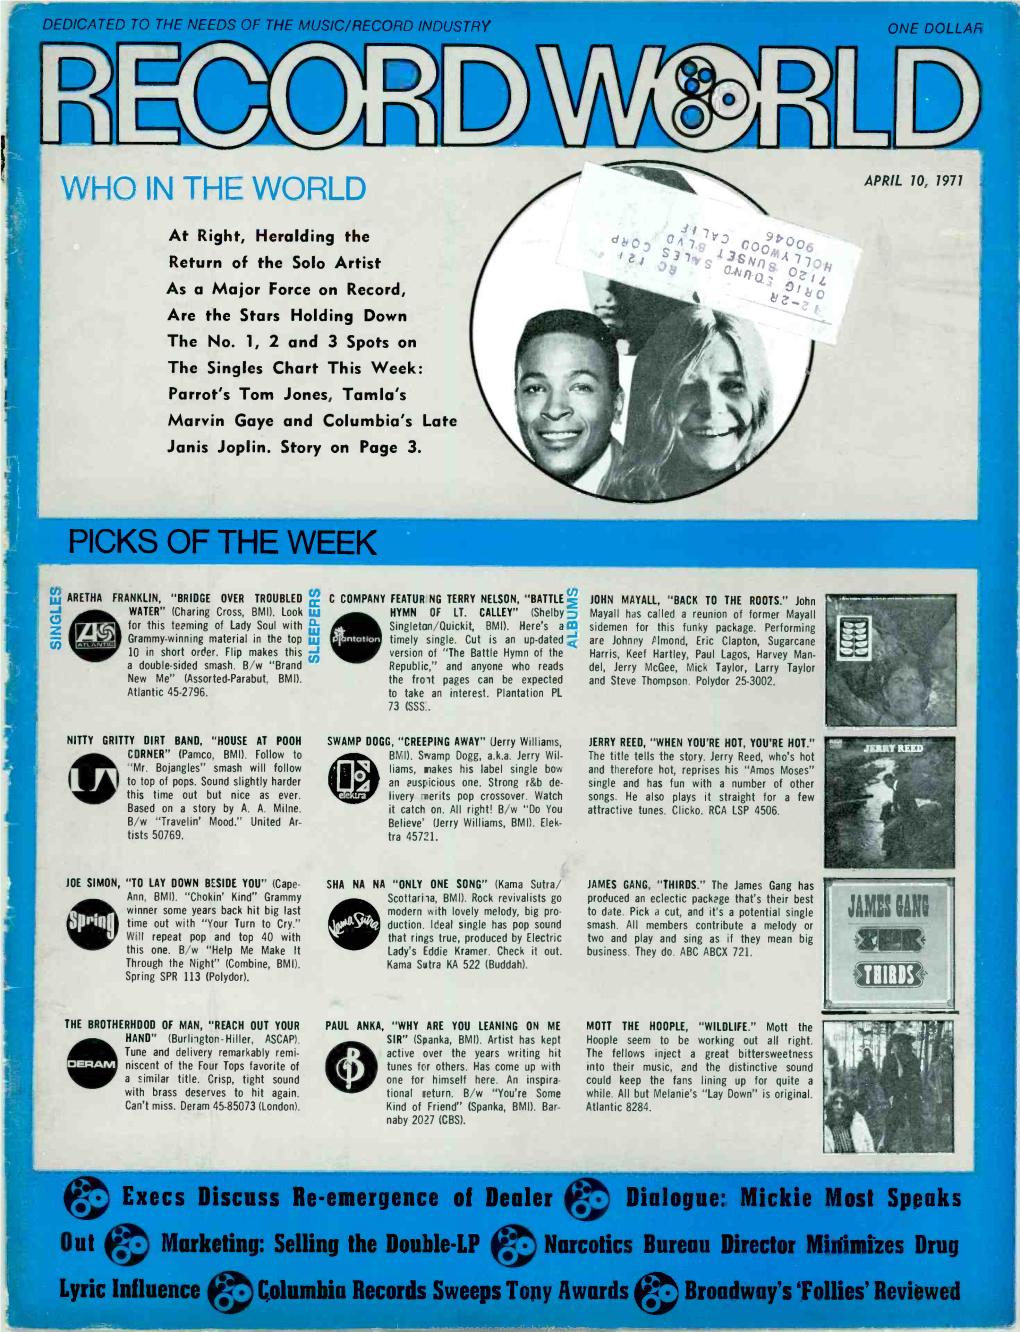 Fill WHO in HE WORLD APRIL 10, 1971